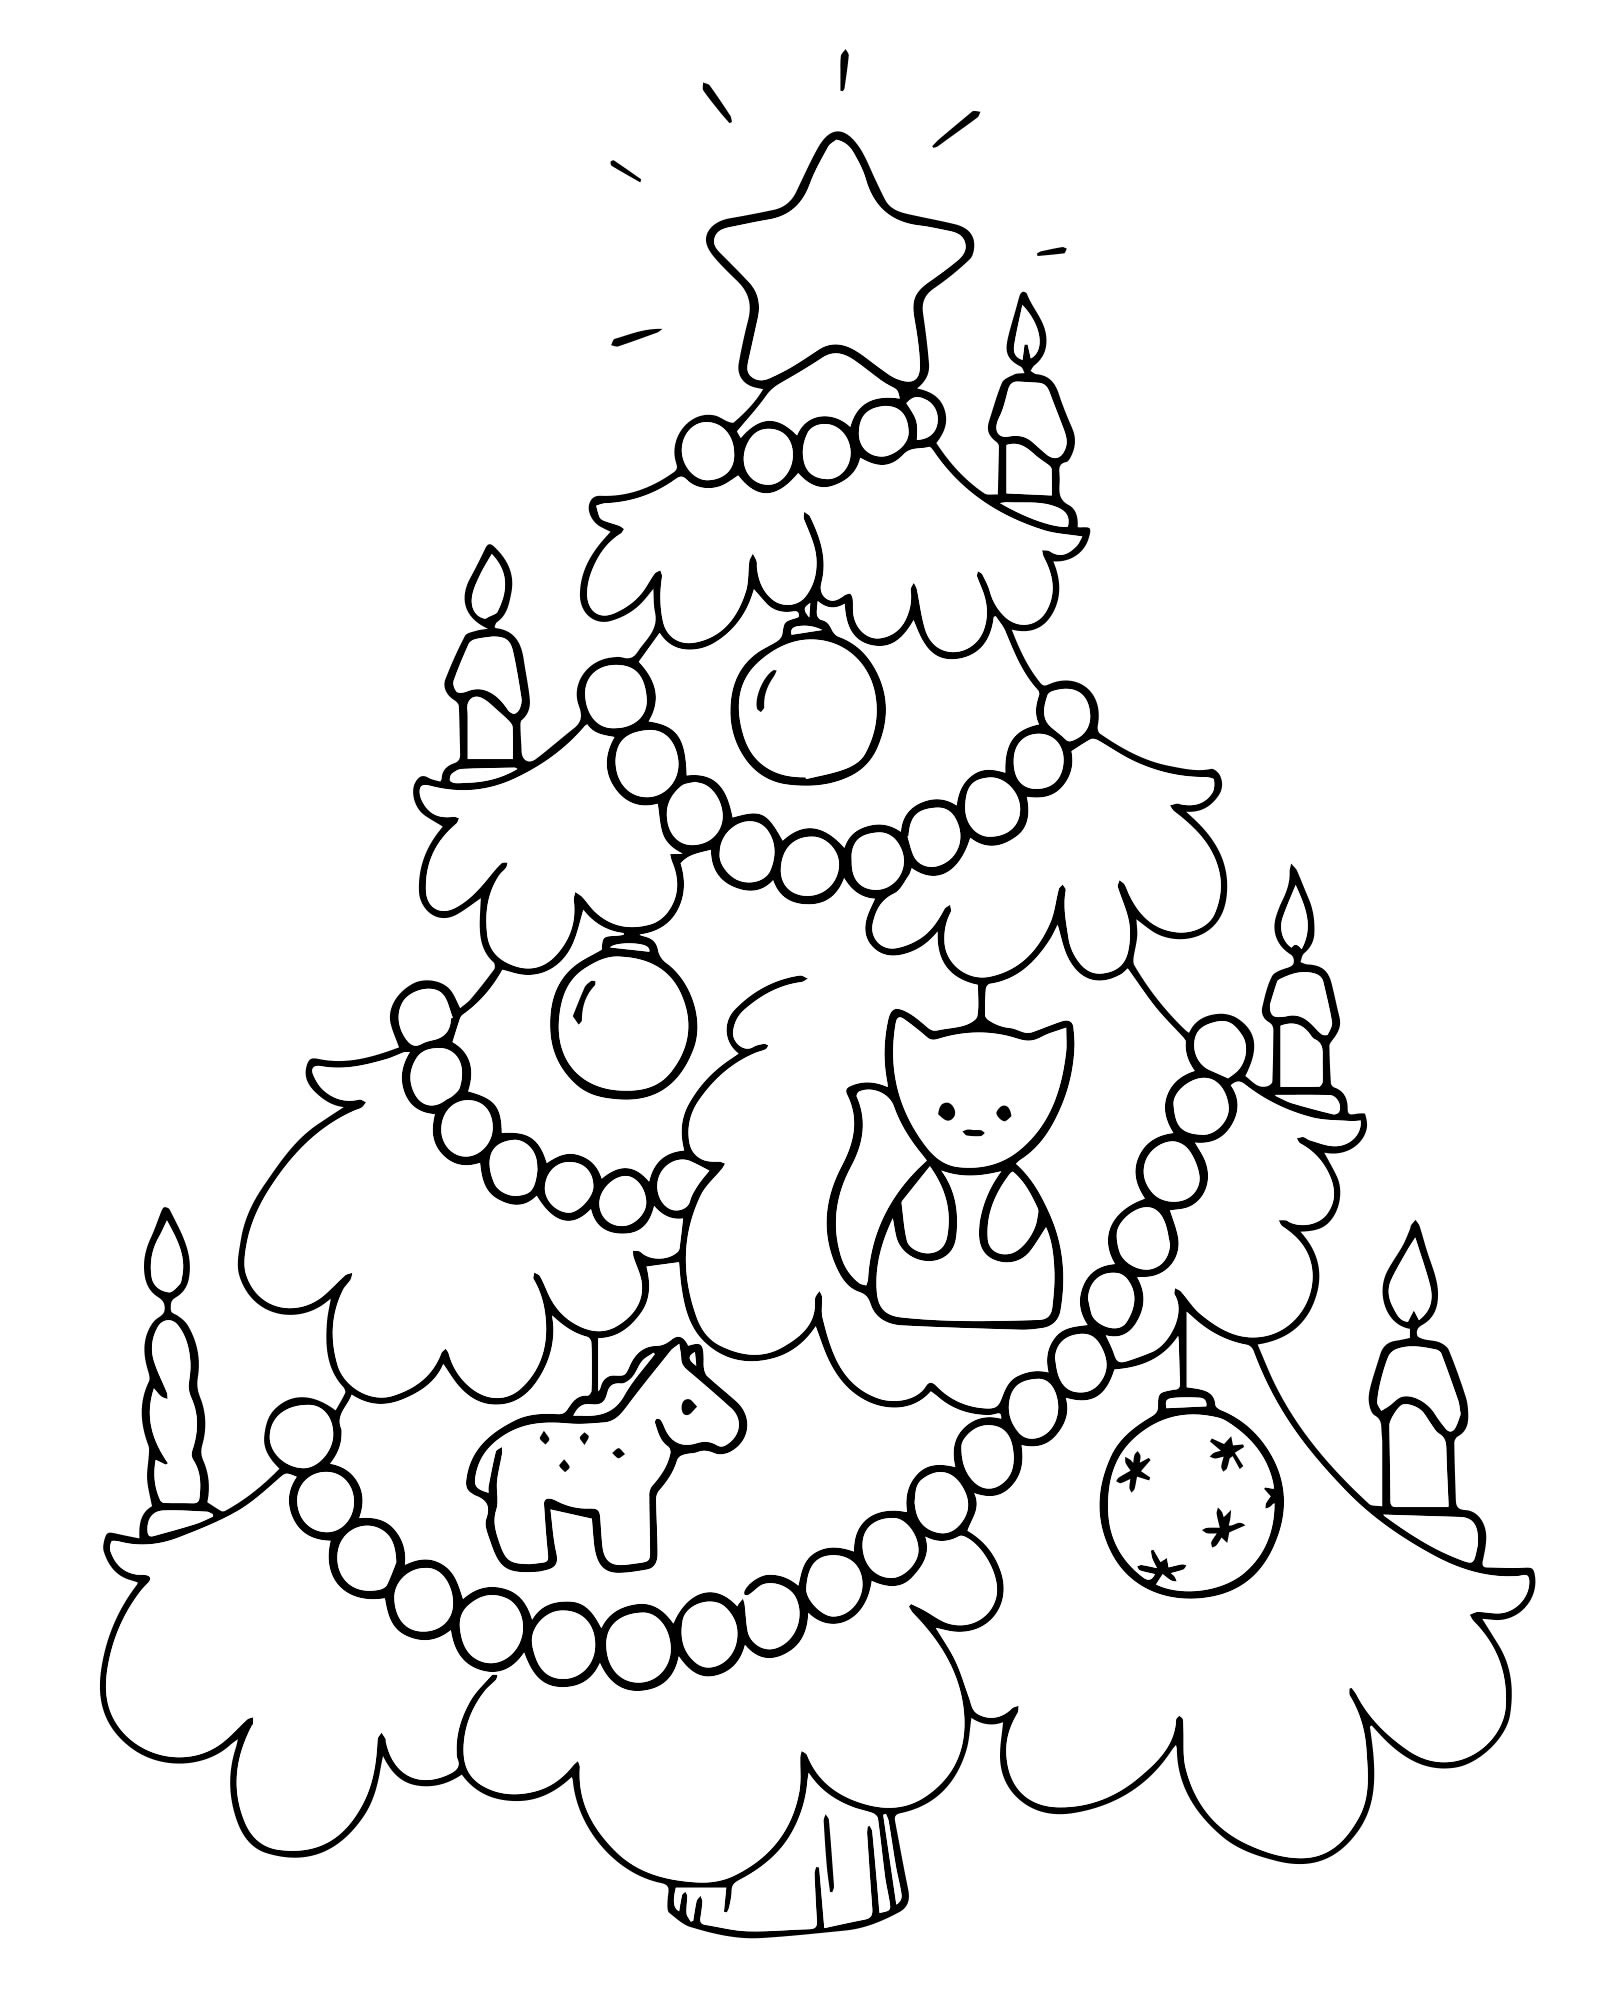 Attractive Christmas tree picture for kids